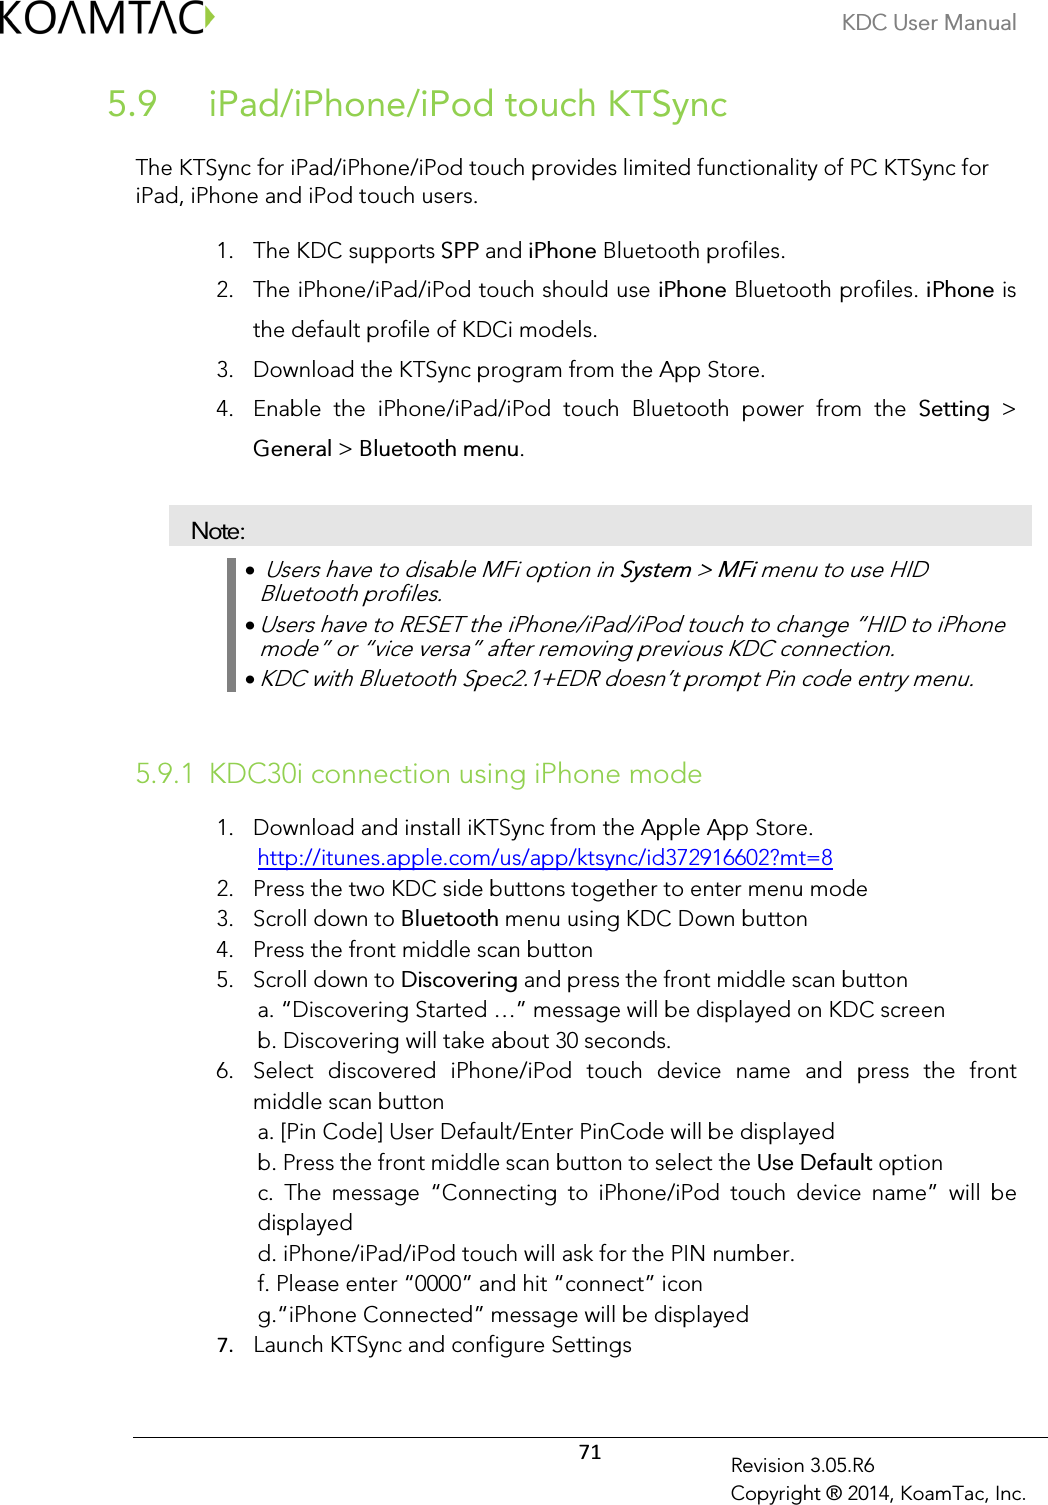 KDC User Manual  71 Revision 3.05.R6 Copyright ® 2014, KoamTac, Inc.  iPad/iPhone/iPod touch KTSync 5.9 The KTSync for iPad/iPhone/iPod touch provides limited functionality of PC KTSync for iPad, iPhone and iPod touch users.  1. The KDC supports SPP and iPhone Bluetooth profiles. 2. The iPhone/iPad/iPod touch should use iPhone Bluetooth profiles. iPhone is the default profile of KDCi models. 3. Download the KTSync program from the App Store. 4. Enable  the  iPhone/iPad/iPod  touch  Bluetooth  power  from  the  Setting  &gt; General &gt; Bluetooth menu. Note: •  Users have to disable MFi option in System &gt; MFi menu to use HID Bluetooth profiles. • Users have to RESET the iPhone/iPad/iPod touch to change “HID to iPhone mode” or “vice versa” after removing previous KDC connection. • KDC with Bluetooth Spec2.1+EDR doesn’t prompt Pin code entry menu.  5.9.1 KDC30i connection using iPhone mode 1. Download and install iKTSync from the Apple App Store. http://itunes.apple.com/us/app/ktsync/id372916602?mt=8 2. Press the two KDC side buttons together to enter menu mode 3. Scroll down to Bluetooth menu using KDC Down button 4. Press the front middle scan button 5. Scroll down to Discovering and press the front middle scan button a. “Discovering Started …” message will be displayed on KDC screen b. Discovering will take about 30 seconds. 6. Select  discovered  iPhone/iPod  touch  device  name  and  press  the  front middle scan button a. [Pin Code] User Default/Enter PinCode will be displayed b. Press the front middle scan button to select the Use Default option c.  The  message  “Connecting  to  iPhone/iPod  touch  device  name”  will  be displayed d. iPhone/iPad/iPod touch will ask for the PIN number. f. Please enter “0000” and hit “connect” icon g.“iPhone Connected” message will be displayed 7. Launch KTSync and configure Settings 